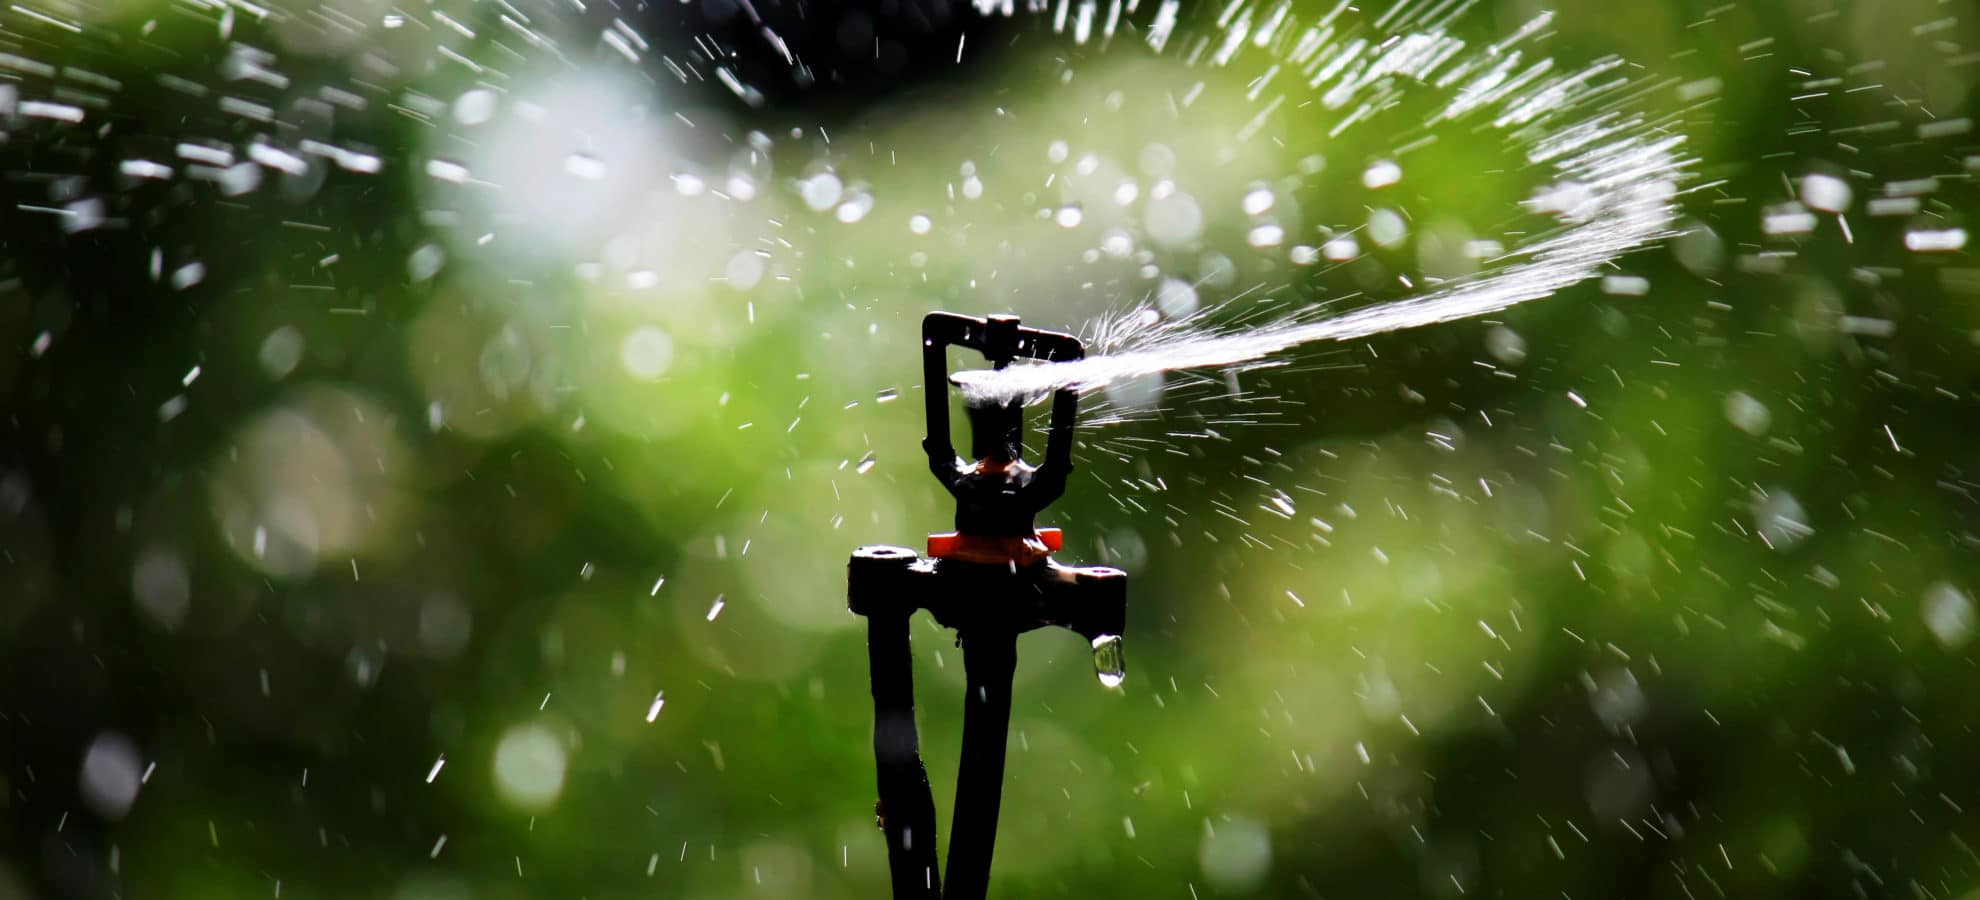 6 Best Sprinklers for a Small Lawn - Reviews and Buying Guide